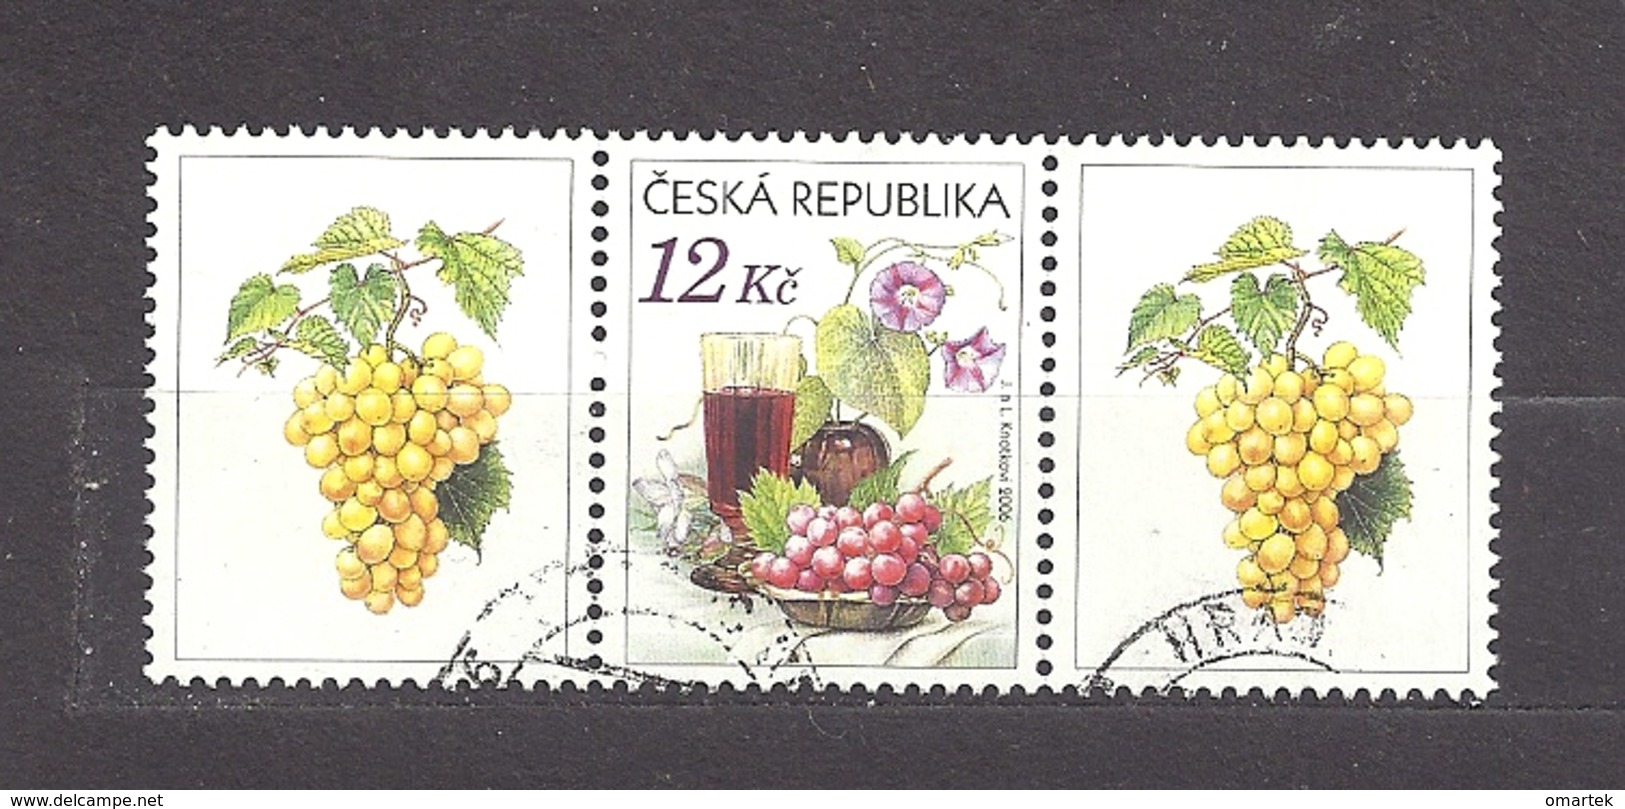 Czech Republic 2006 ⊙ Mi 462 Zf Sc 3296 Still Life With Grape, Glass Of Red Wine And Flowers.Tschechische Republik. C1 - Used Stamps